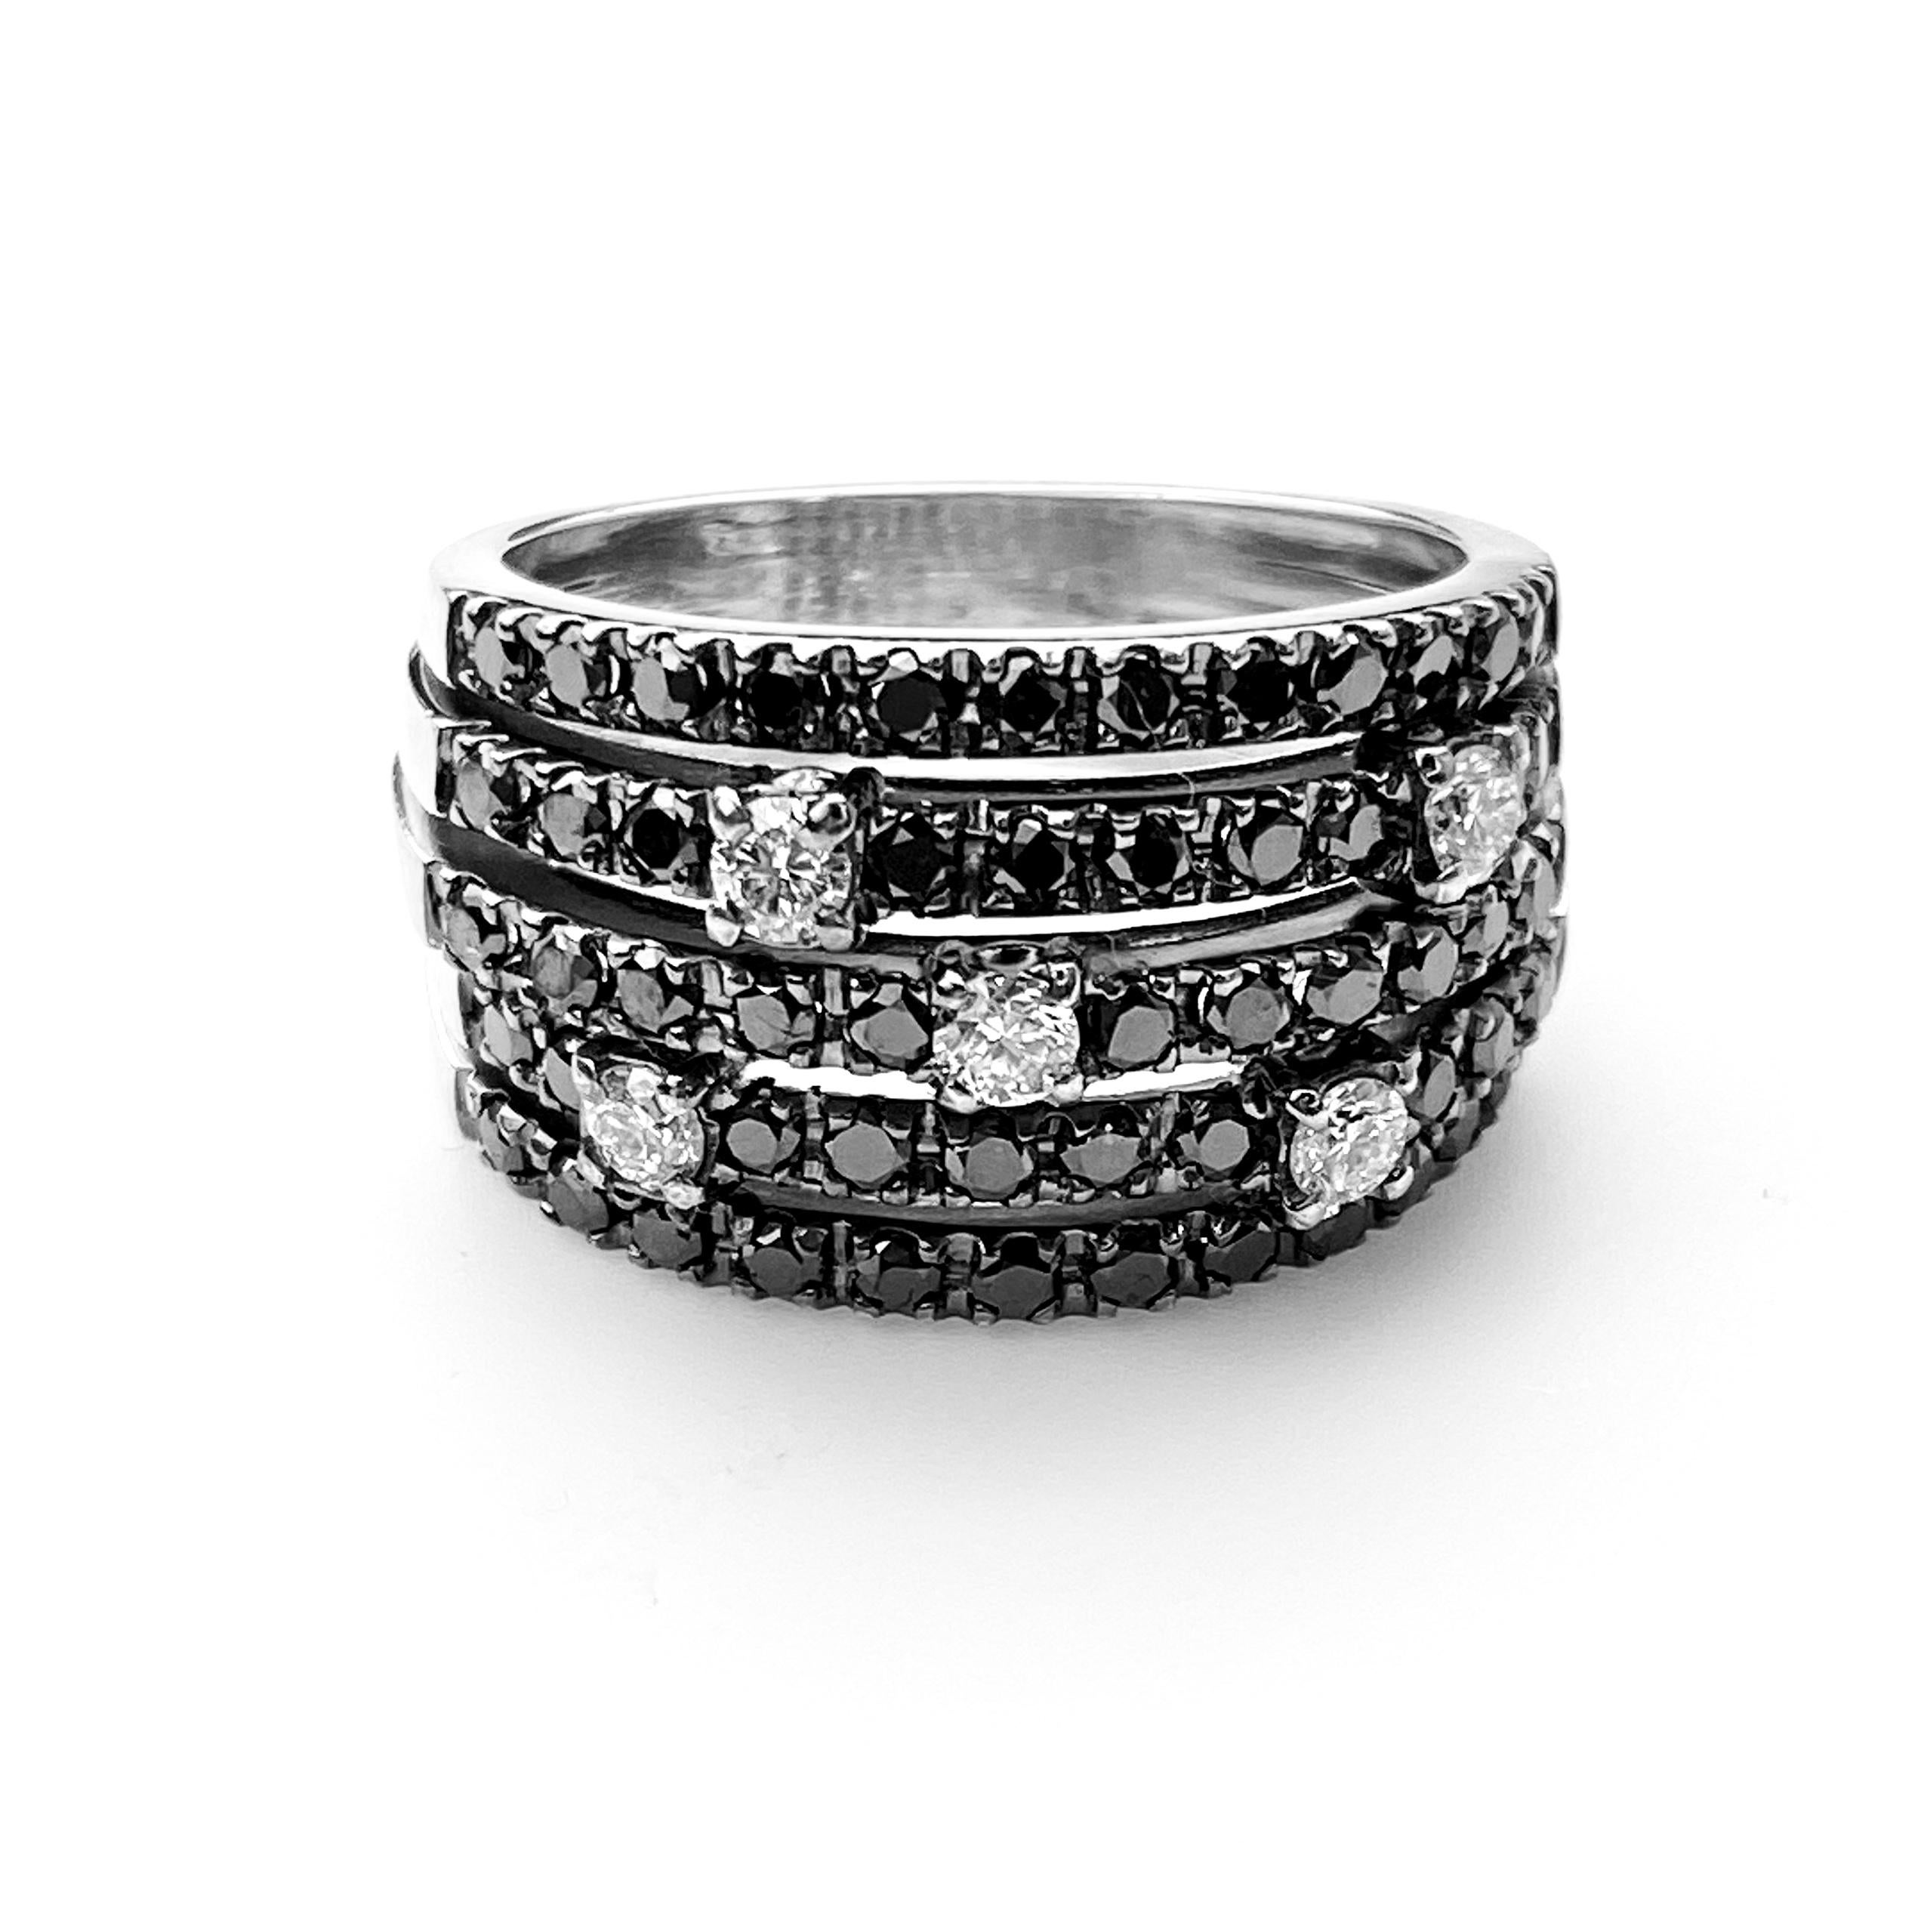 Black diamond five-row ring with white diamond accents. 1.31ct total diamonds. Ring size 6 1/2. Resizing up or down 2 sizes included in price.